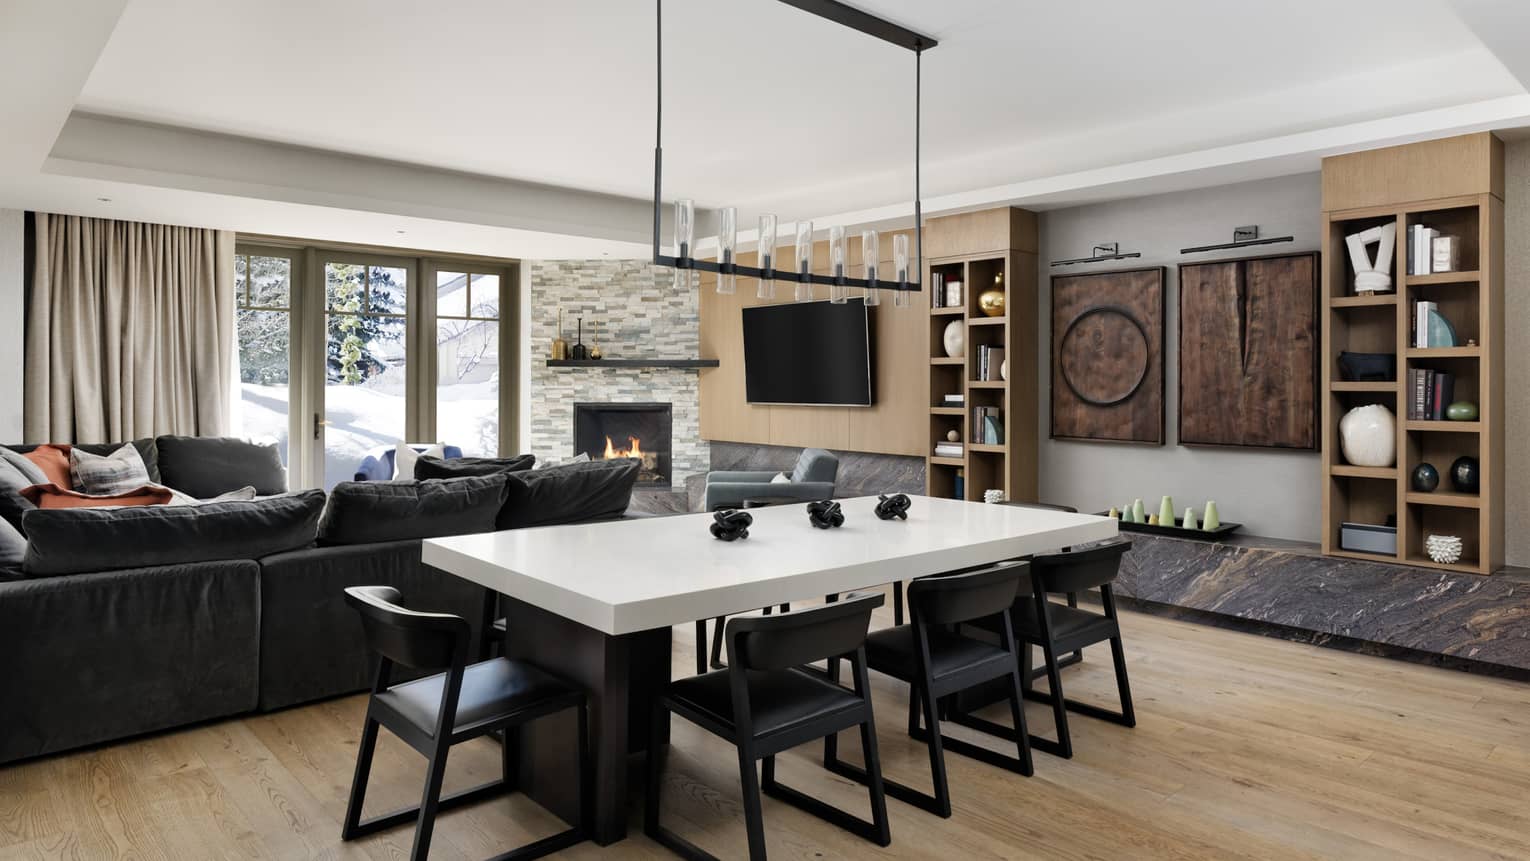 Dining room with white-topped table, 8 black chairs, modern lantern-like light